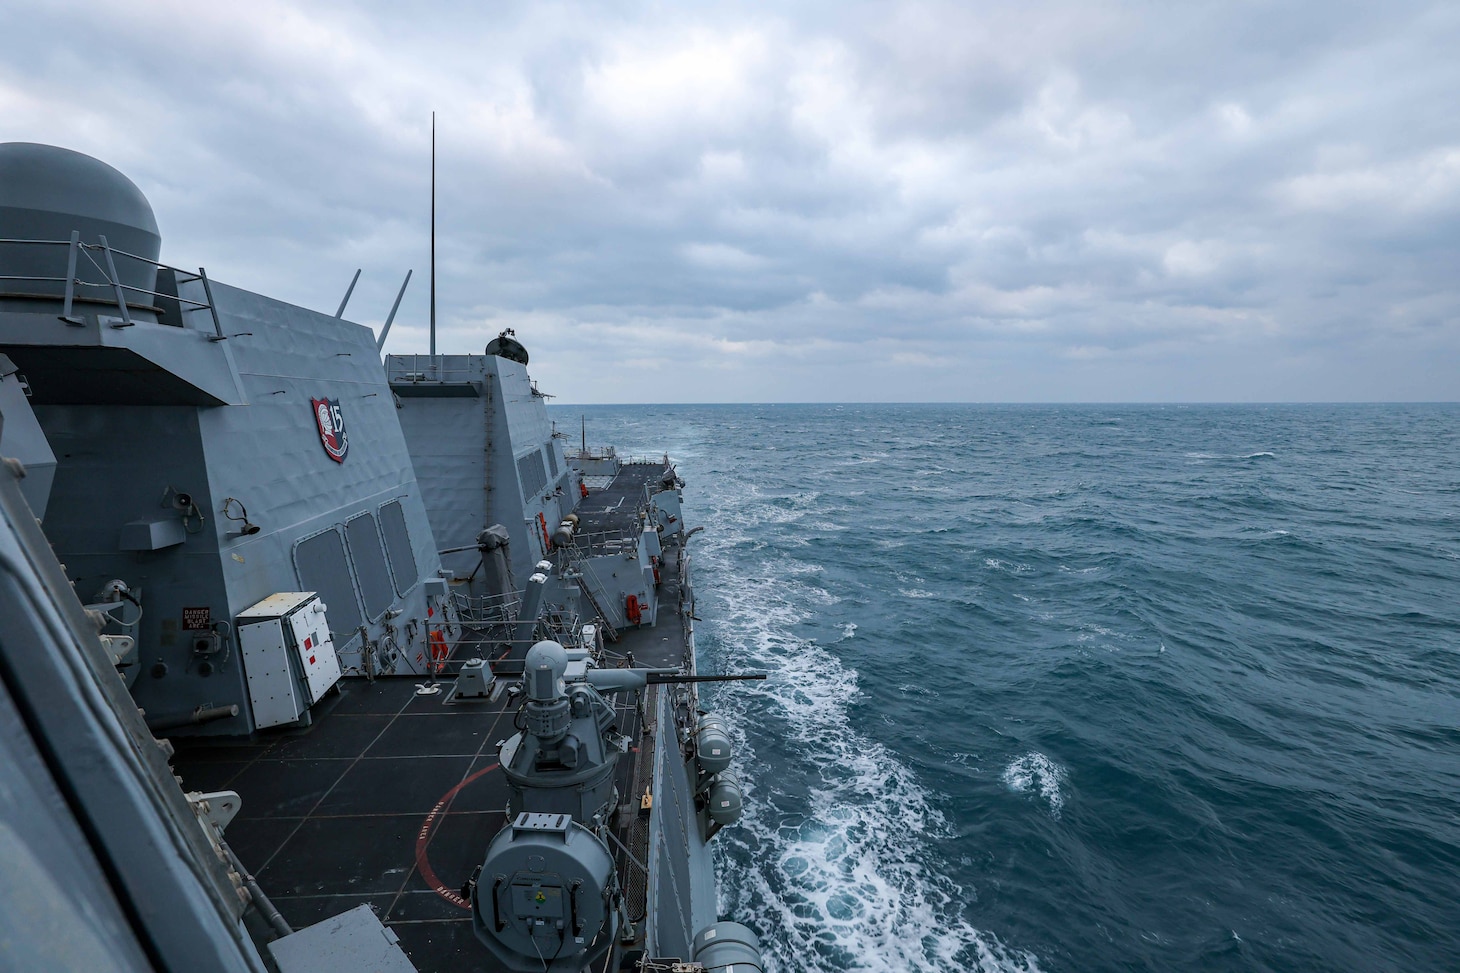 EAST CHINA SEA (Jan. 24, 2024) The Arleigh Burke-class guided-missile destroyer USS John
Finn (DDG 113) conducts routine operations in the East China Sea, Jan. 24. John Finn is
forward-deployed and assigned to Commander, Task Force (CTF) 71/Destroyer Squadron
(DESRON) 15, the Navy’s largest DESRON and the U.S. 7th Fleet’s principal surface force.
(U.S. Navy photo by Mass Communication Specialist 2nd Class Justin Stack)